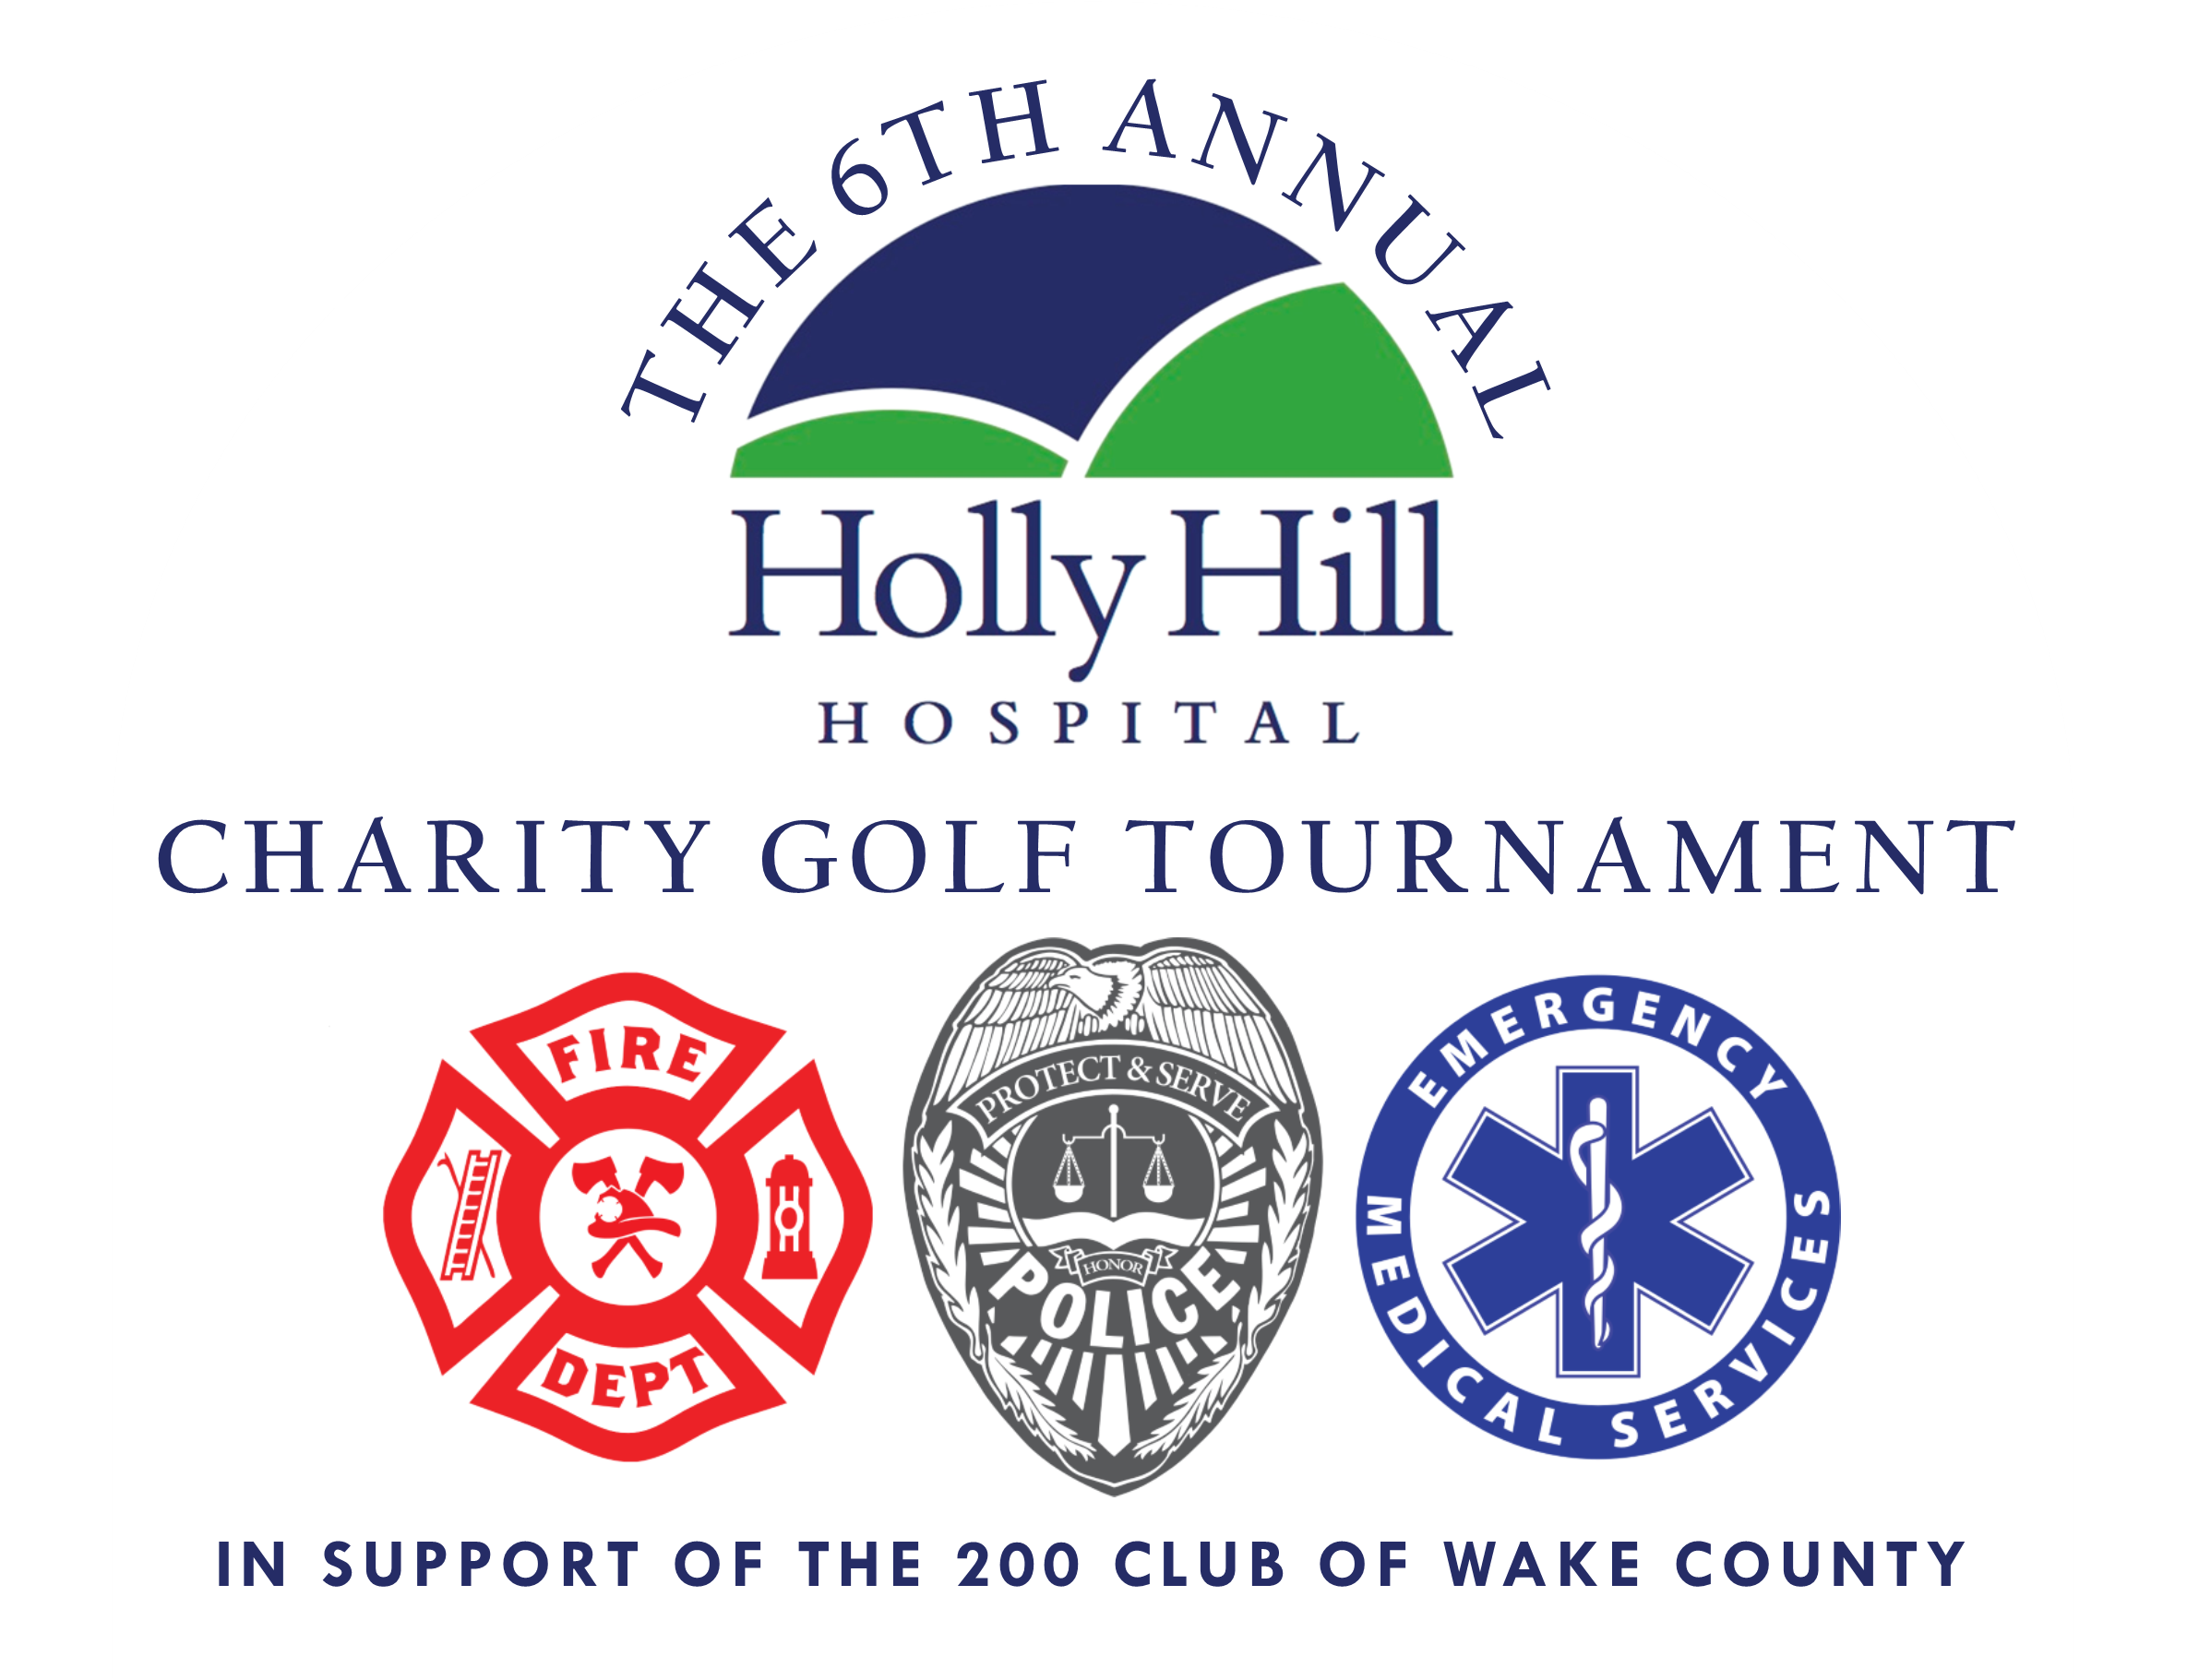 6th Annual First Responder Holly Hill Hospital Charity Golf Tournament